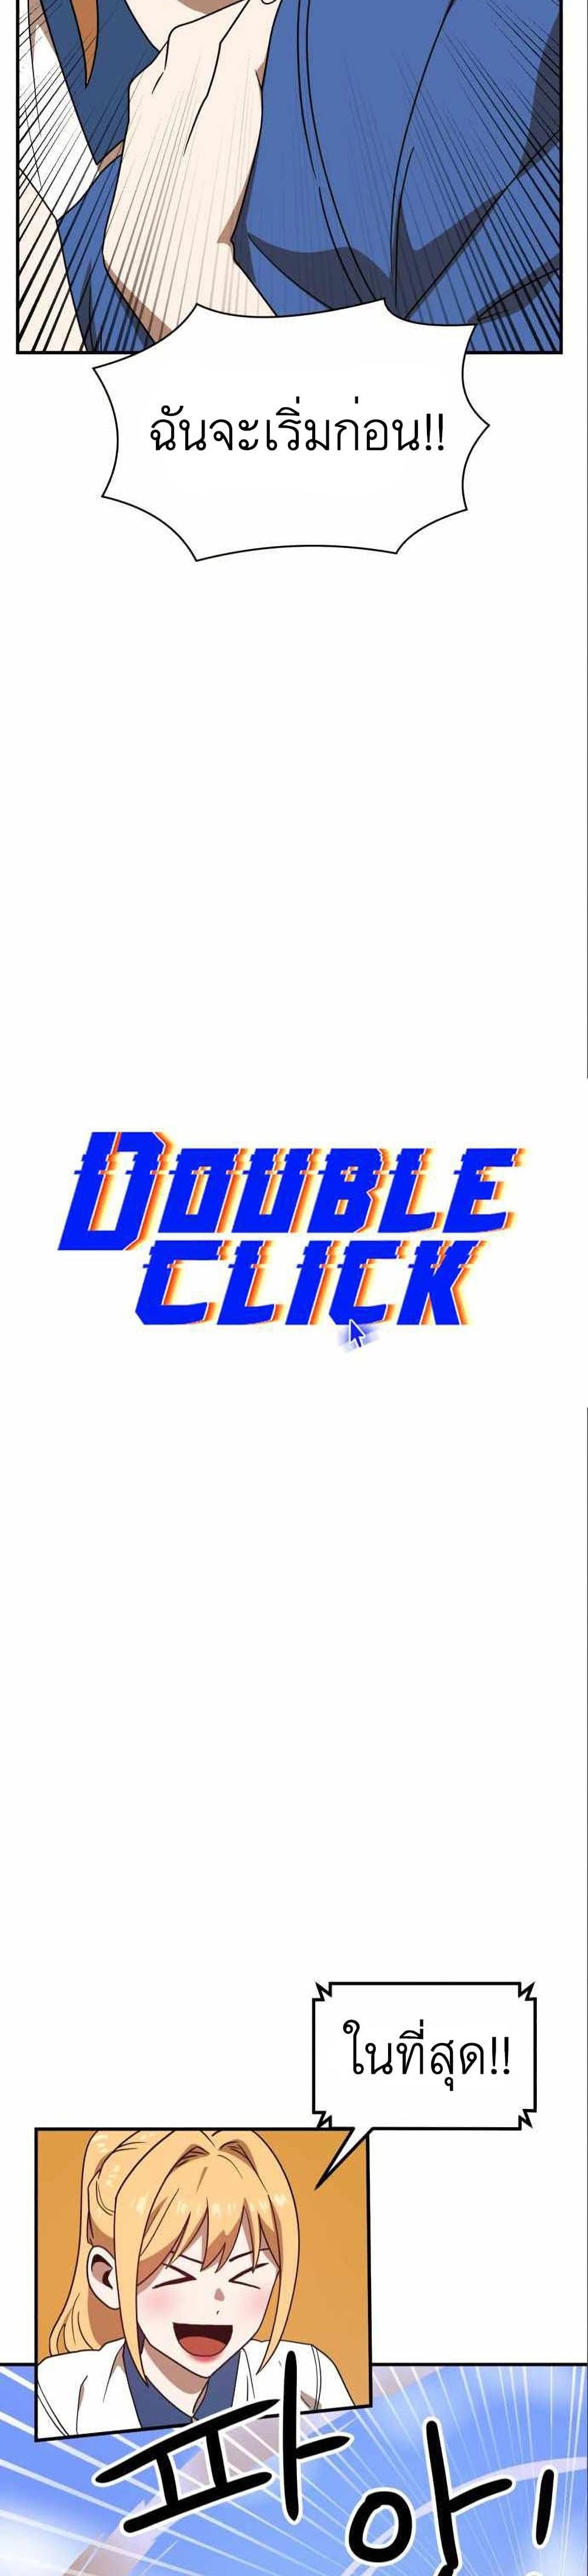 Double Click 47 09